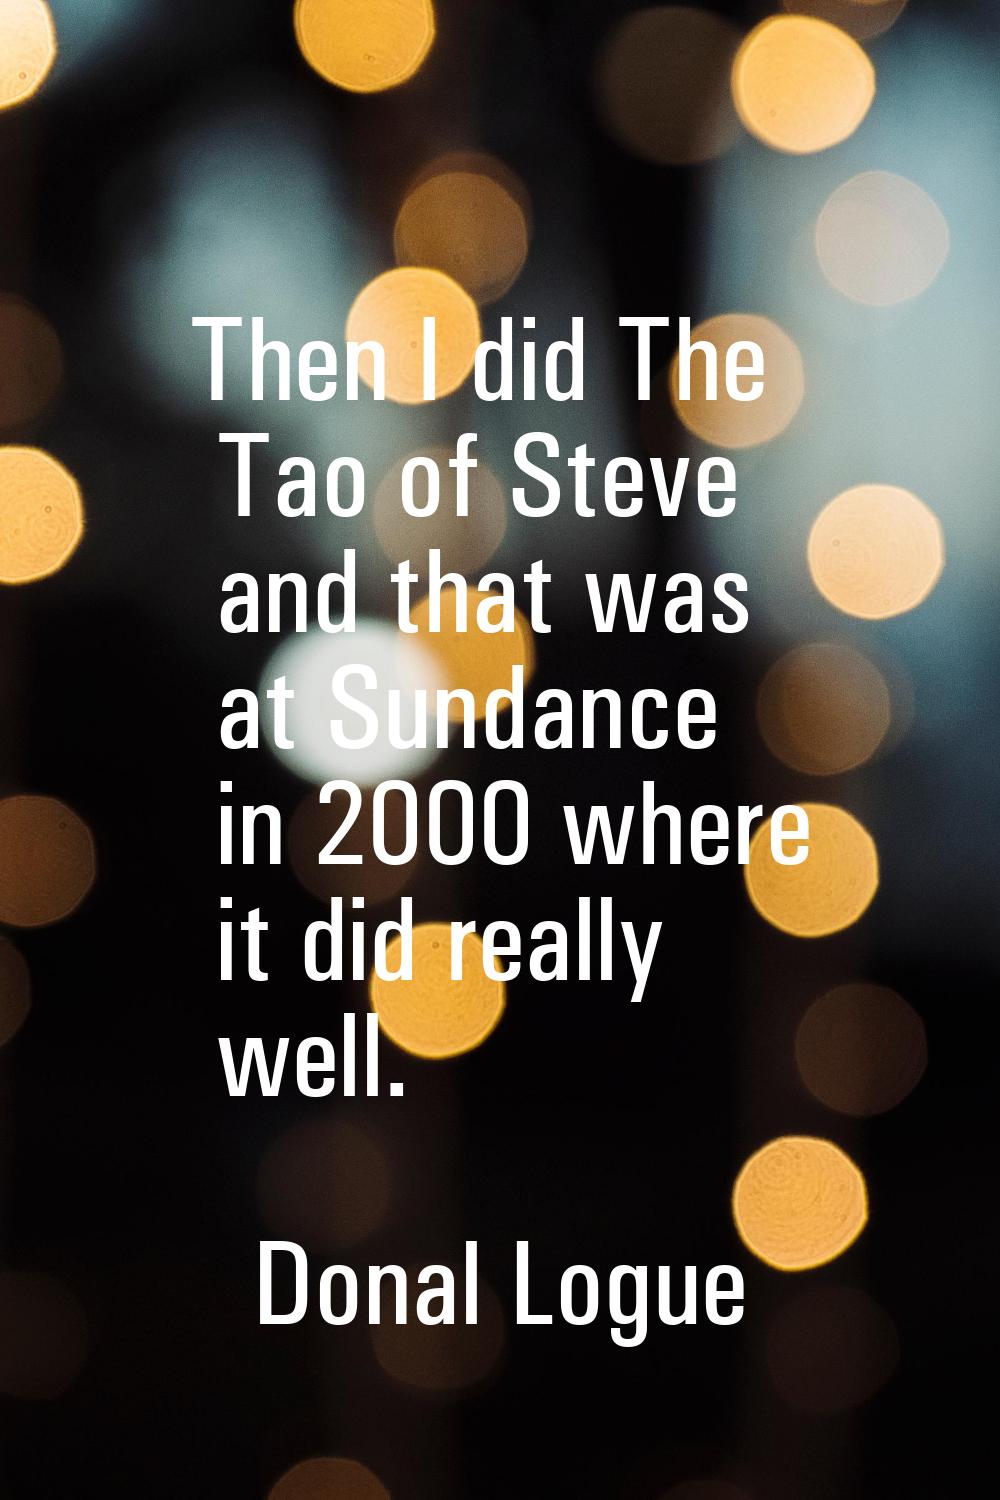 Then I did The Tao of Steve and that was at Sundance in 2000 where it did really well.